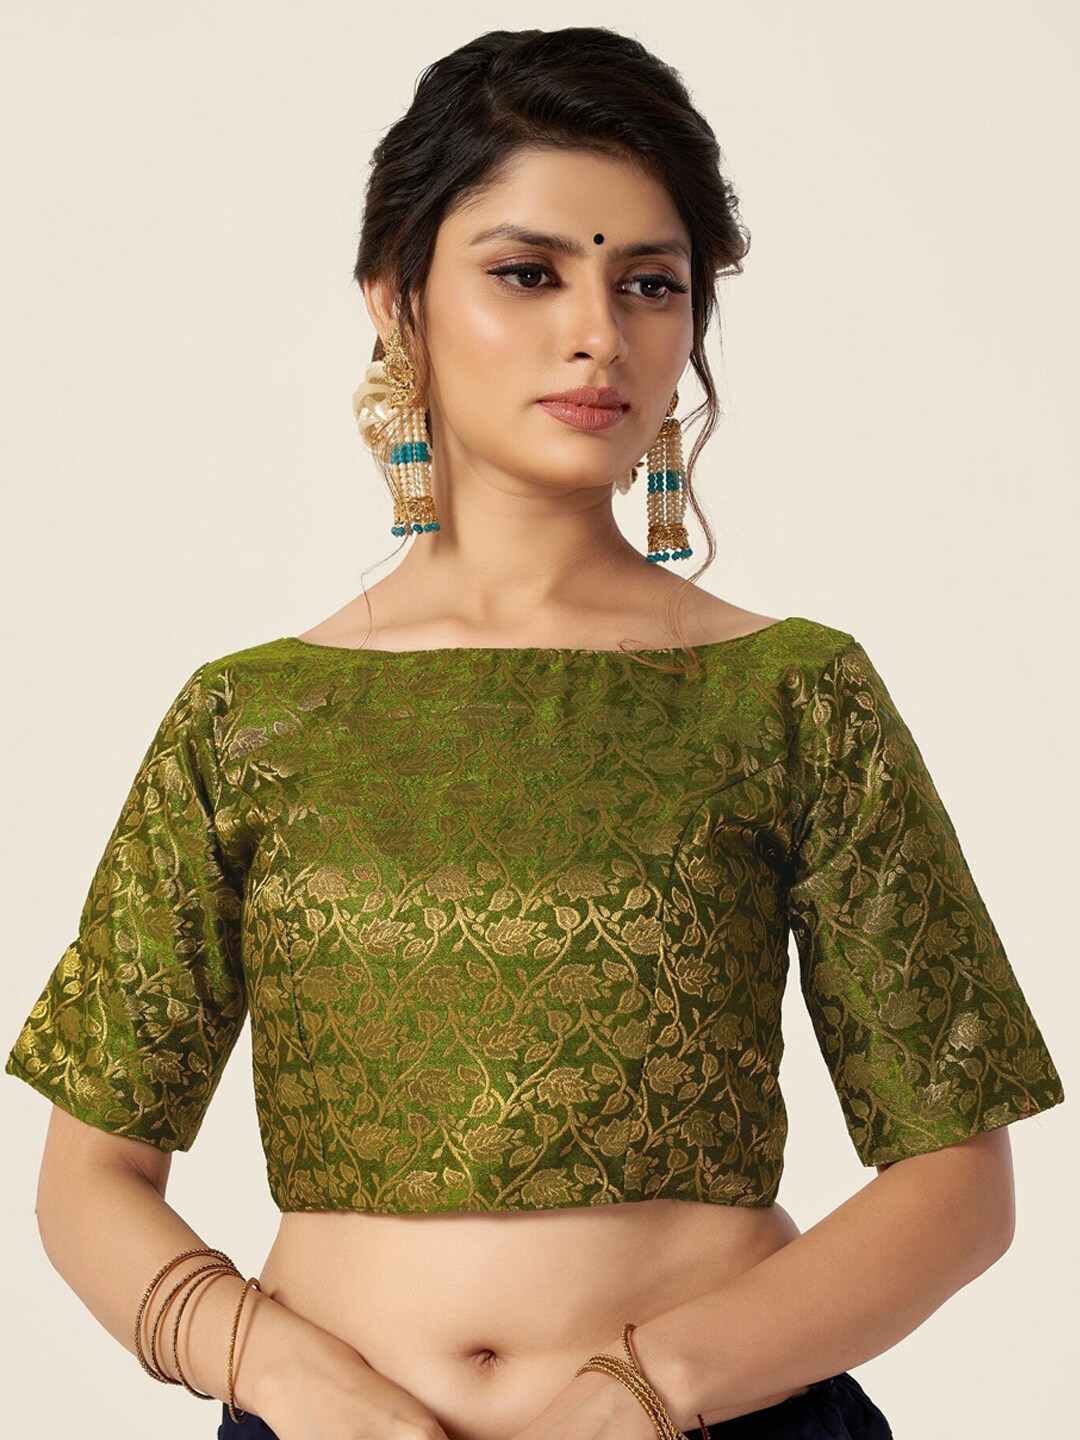 HIMRISE Women Green & Golden Printed Saree Blouse Price in India